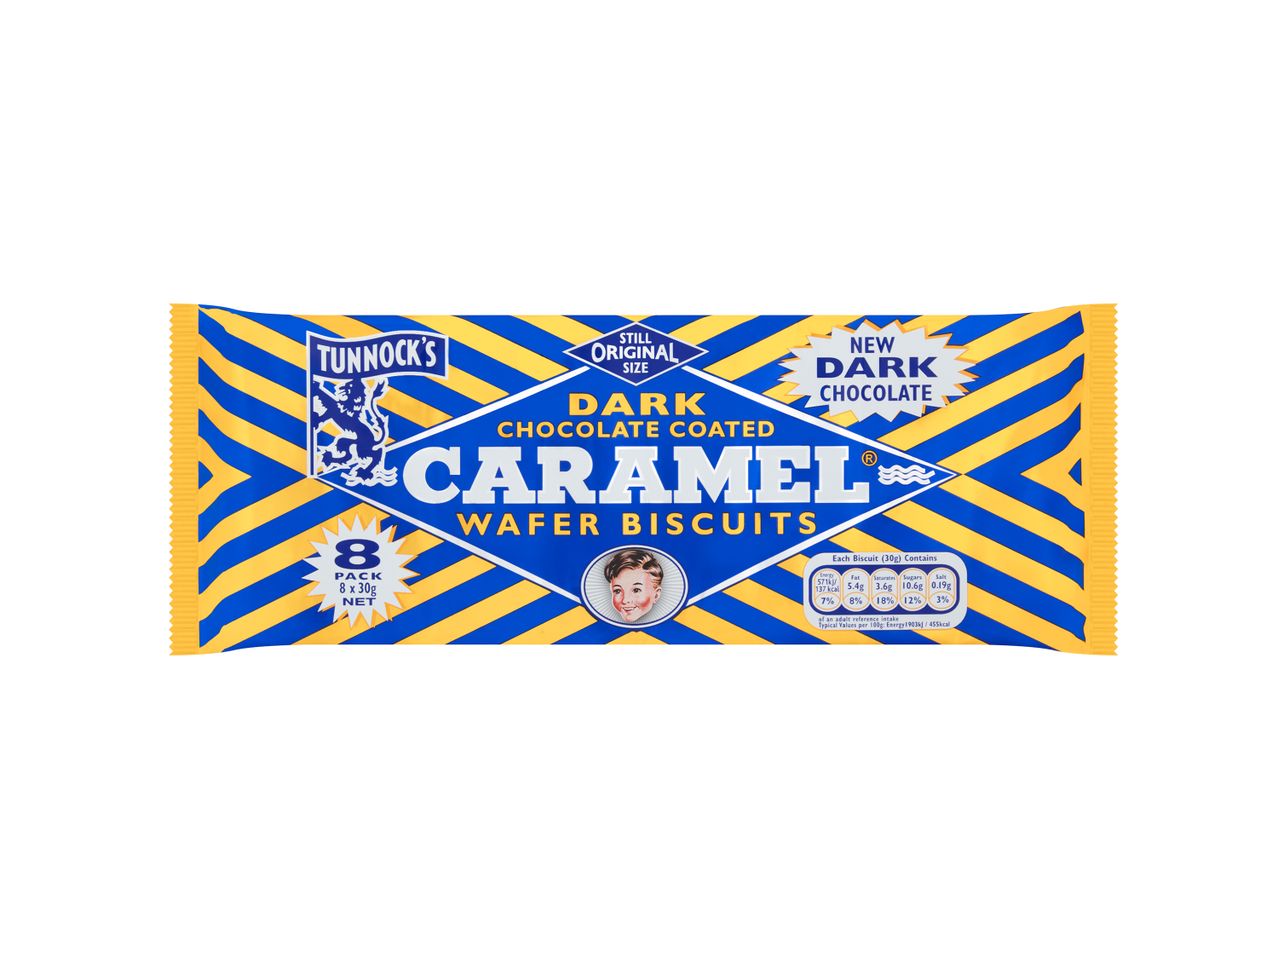 Go to full screen view: Tunnock's Dark Chocolate Caramel Wafer Biscuits - 8 pack - Image 1